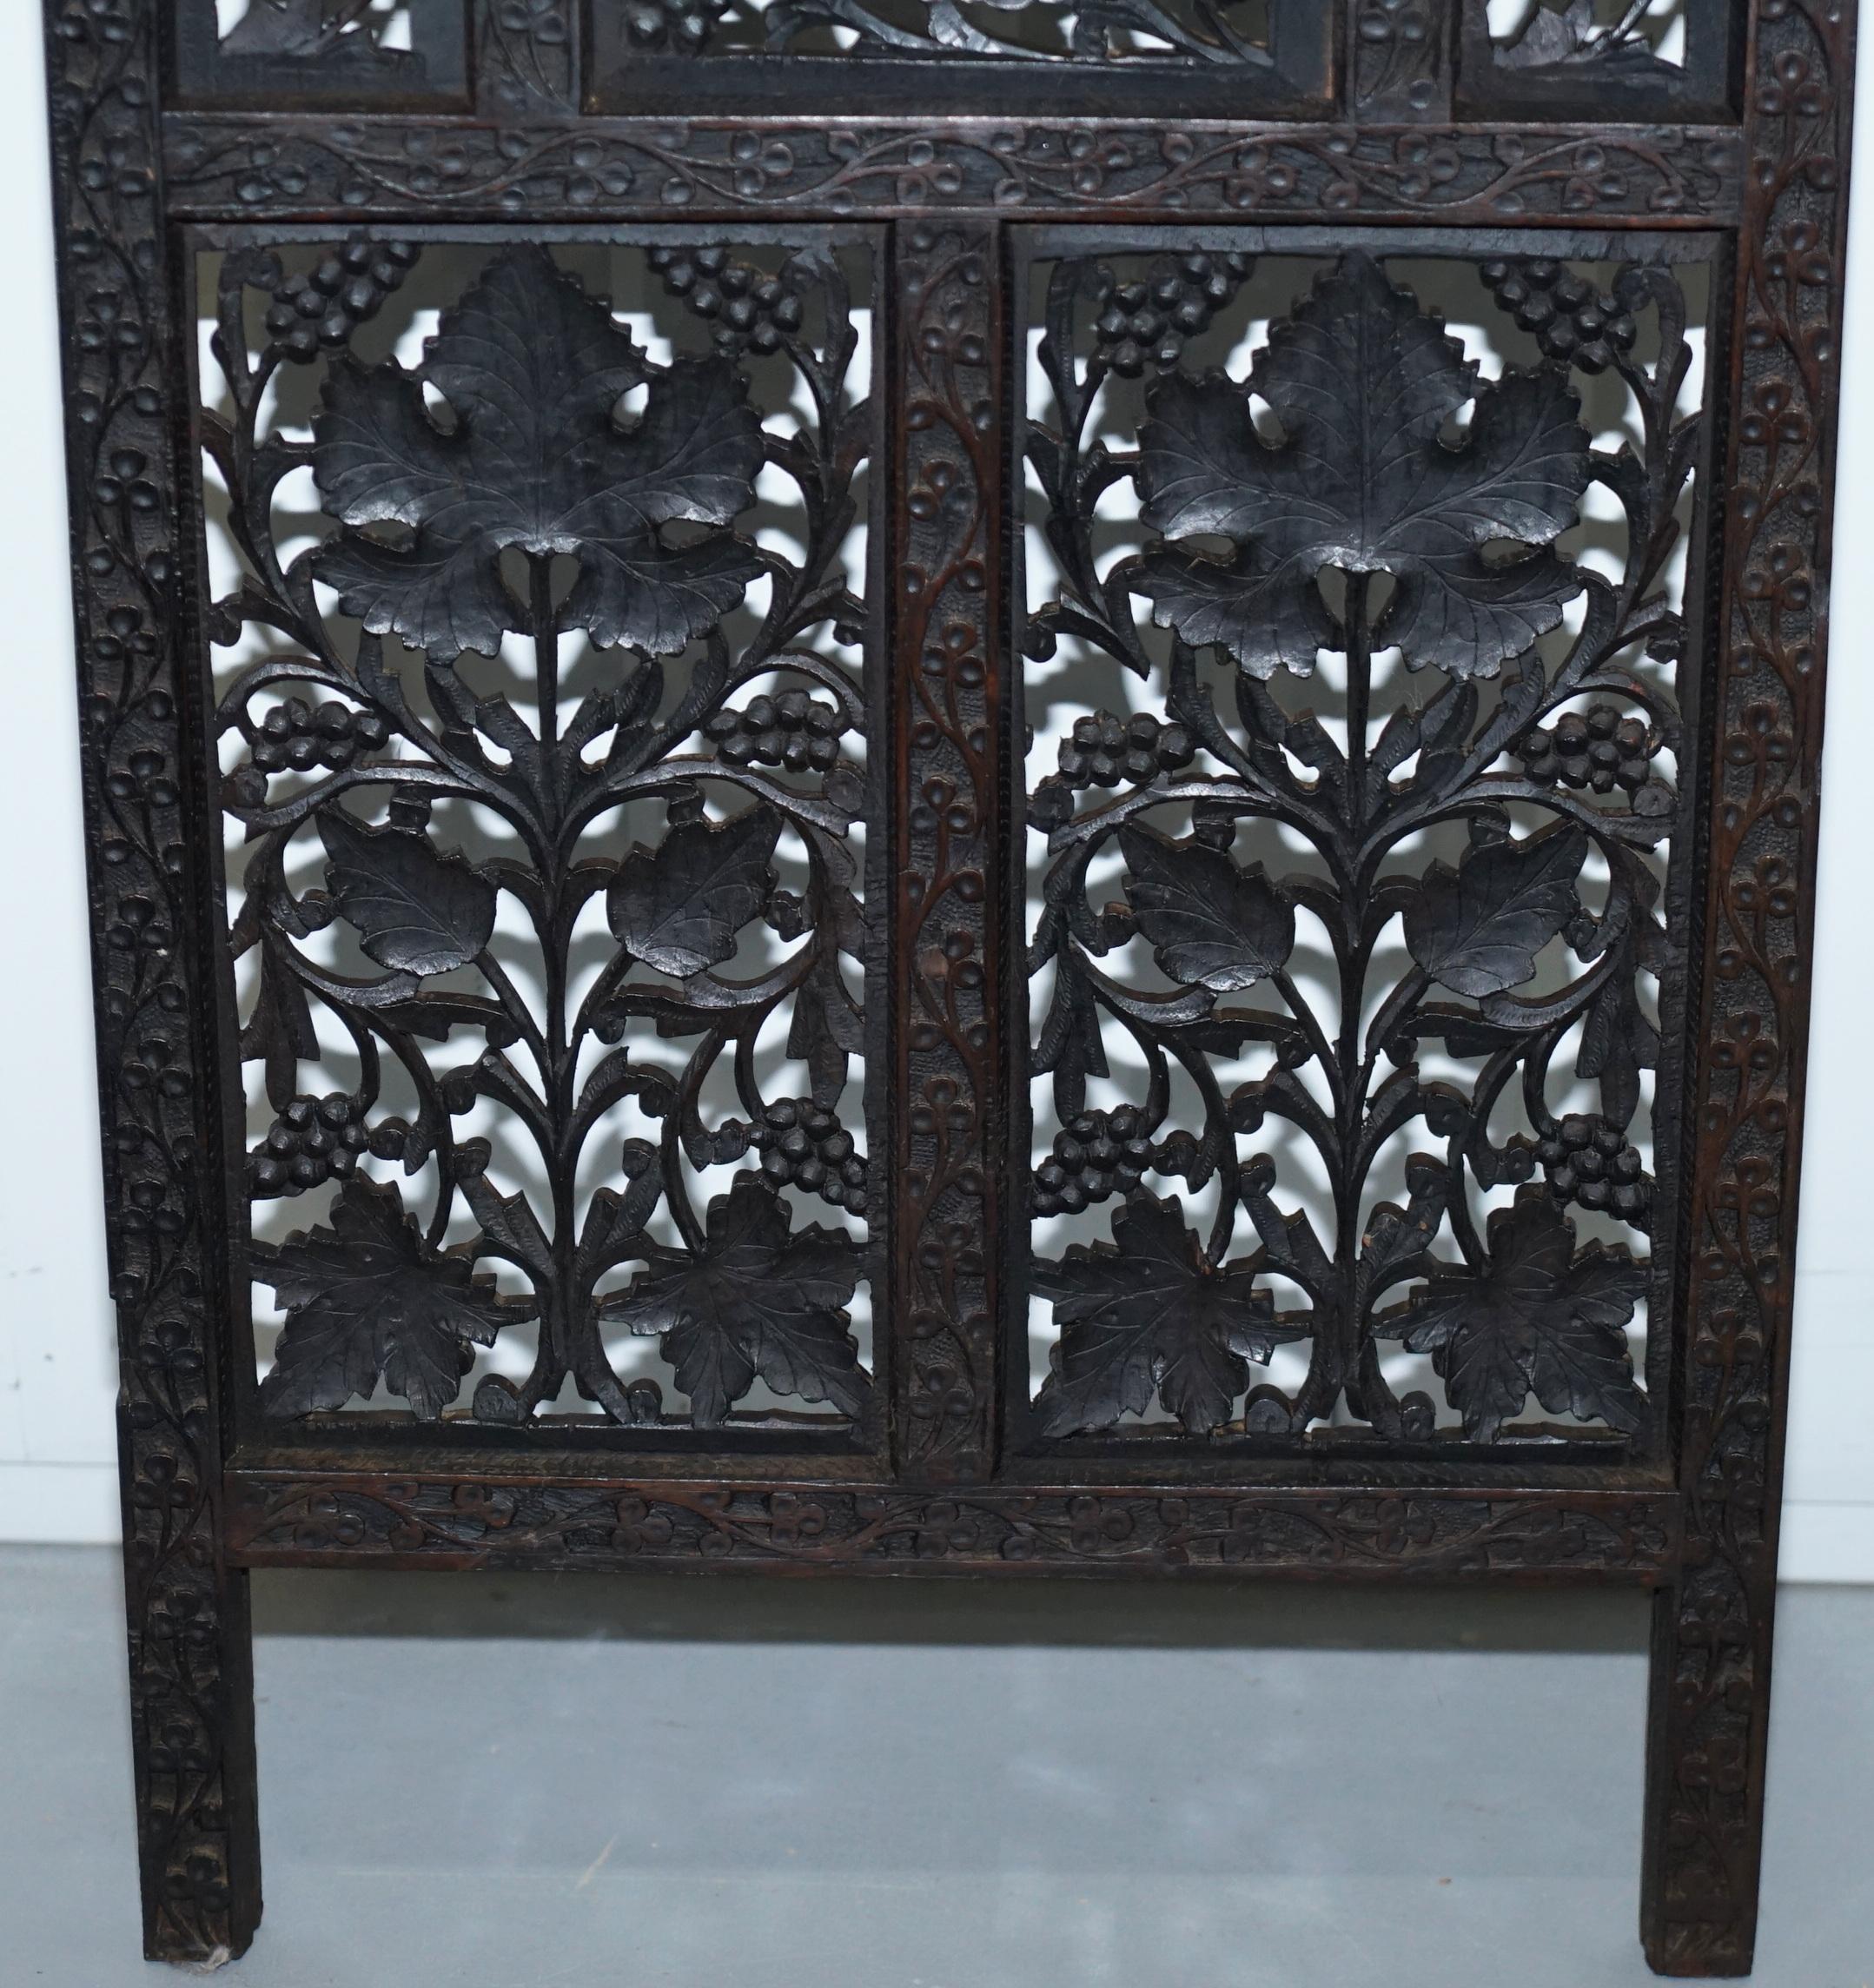 Chinese Export Rare Chinese Fretwork Carved Wall Panels Depicting Leaves Solid Teak Art Wood